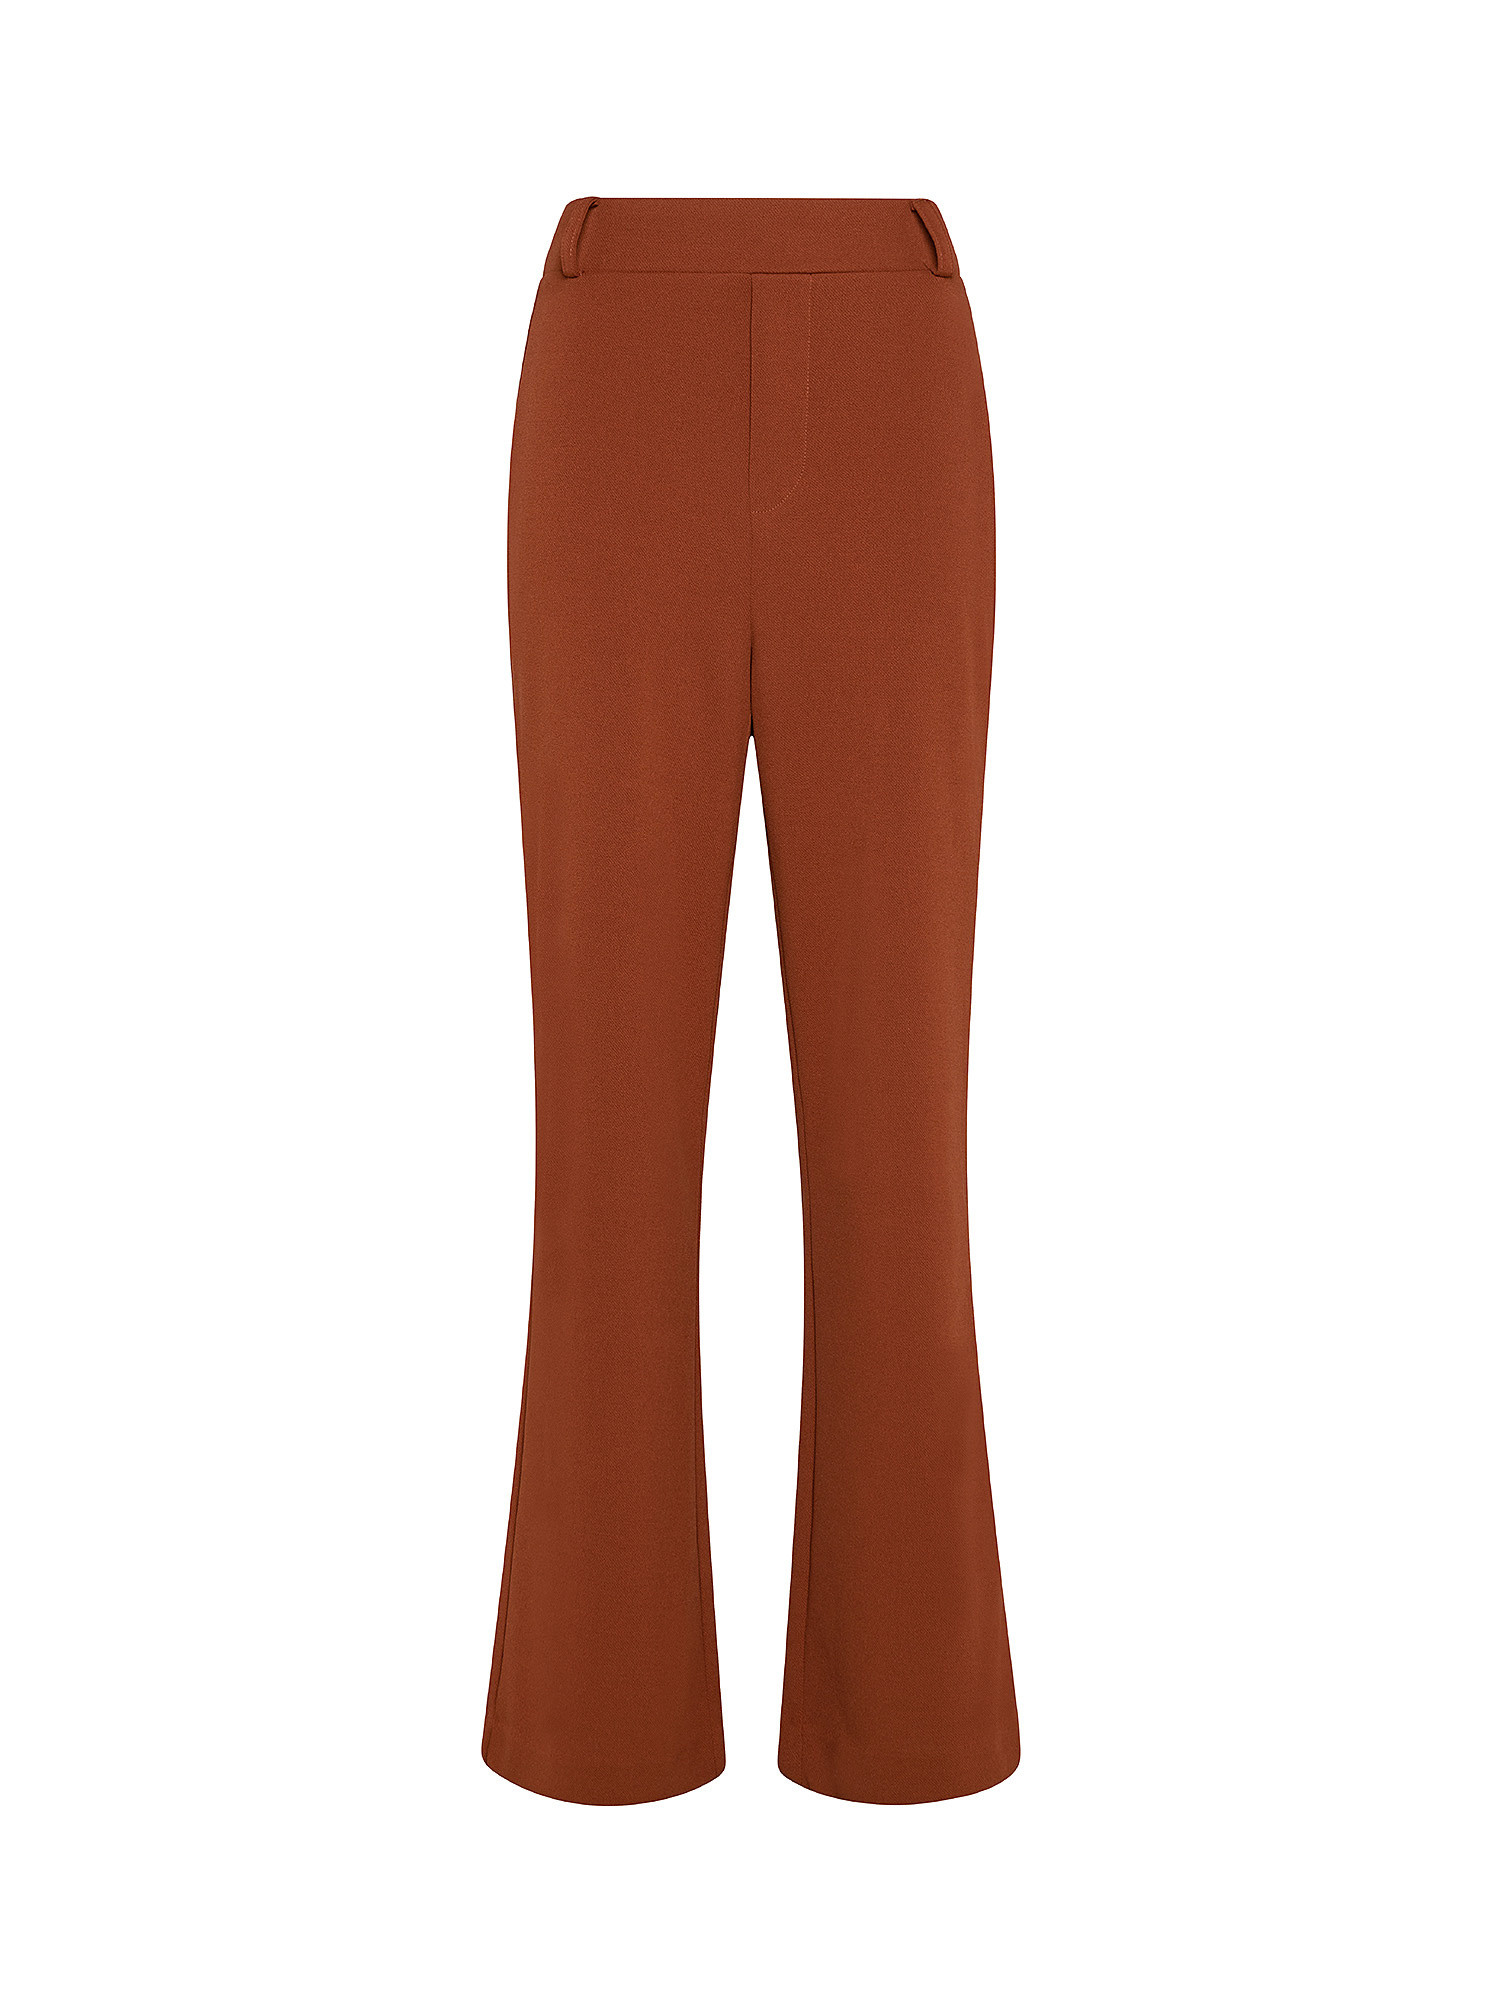 Trousers with elastic, Light Brown, large image number 0